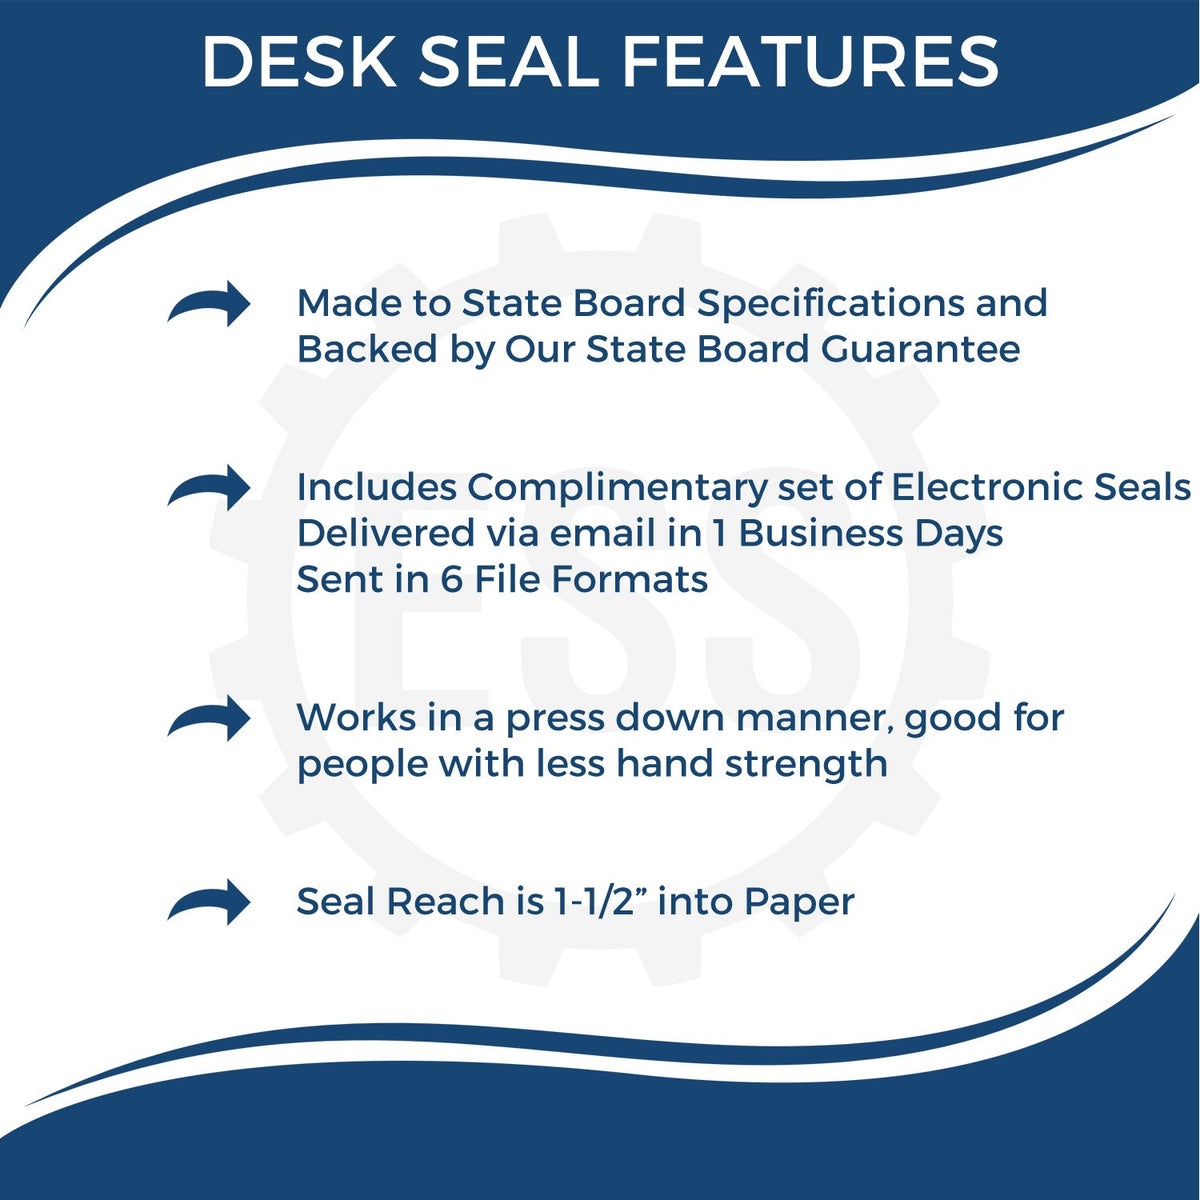 A picture of an infographic highlighting the selling points for the New Jersey Geologist Desk Seal